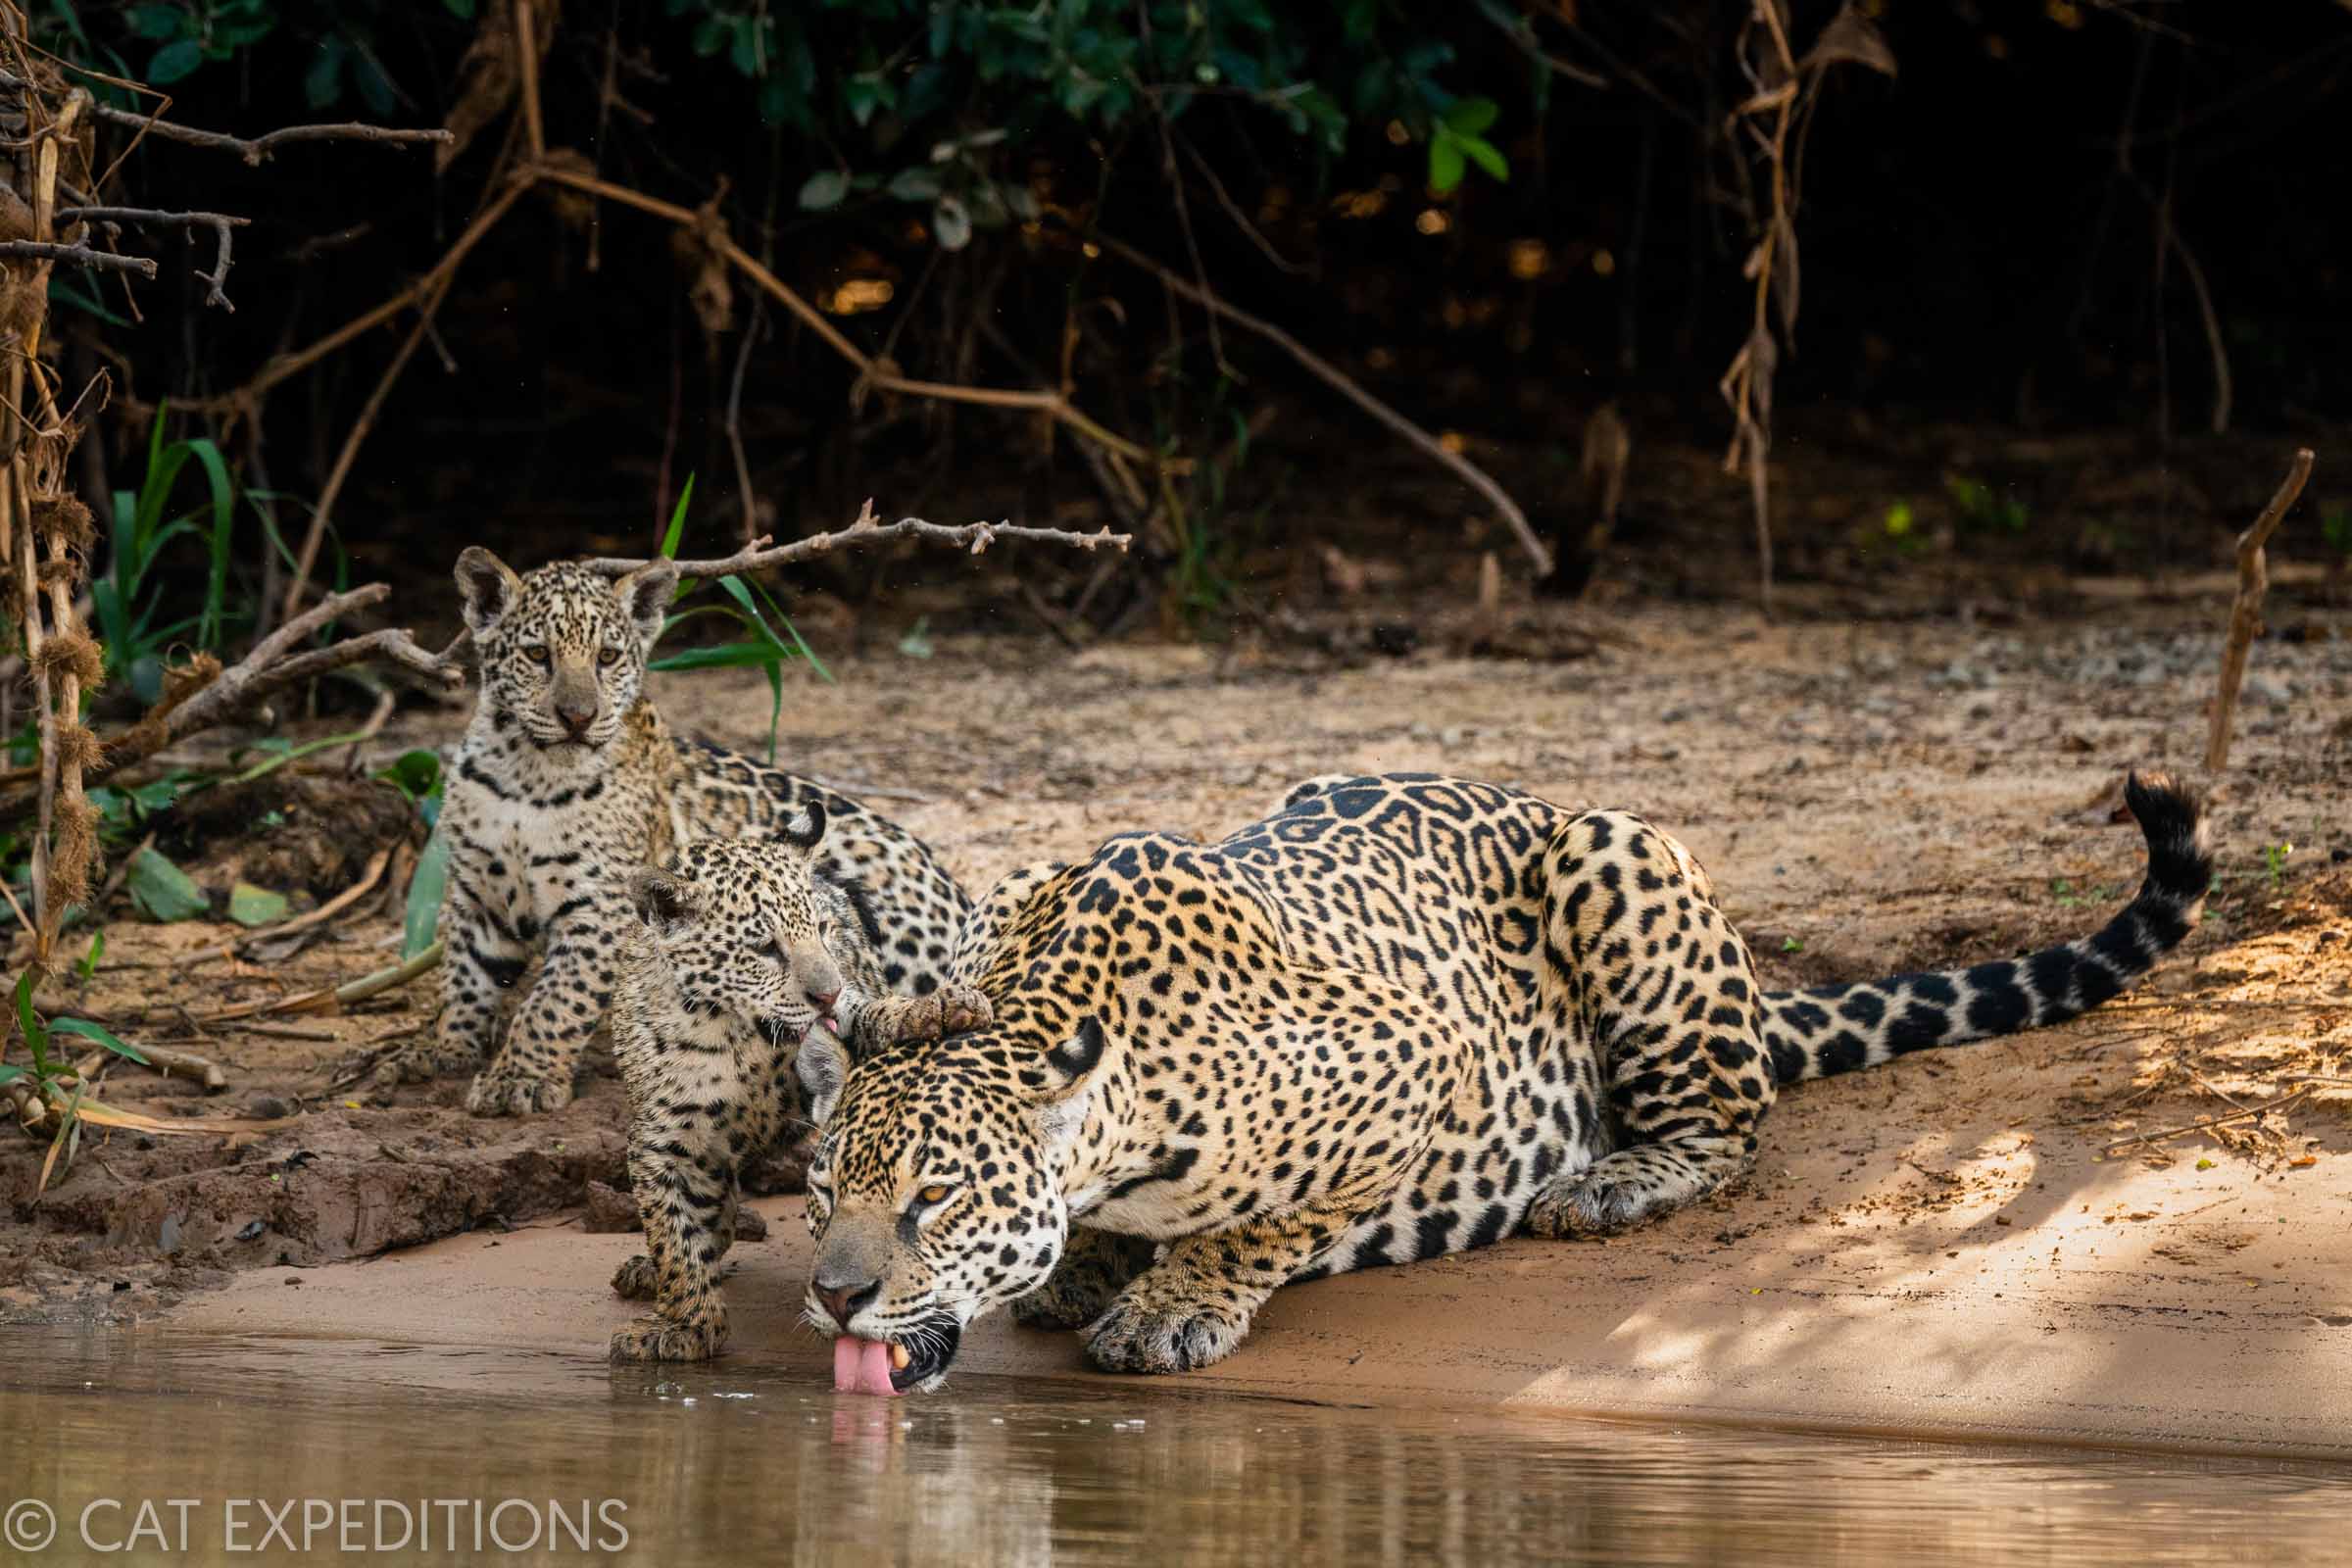 Jaguar mother drinking with cubs in the Pantanal